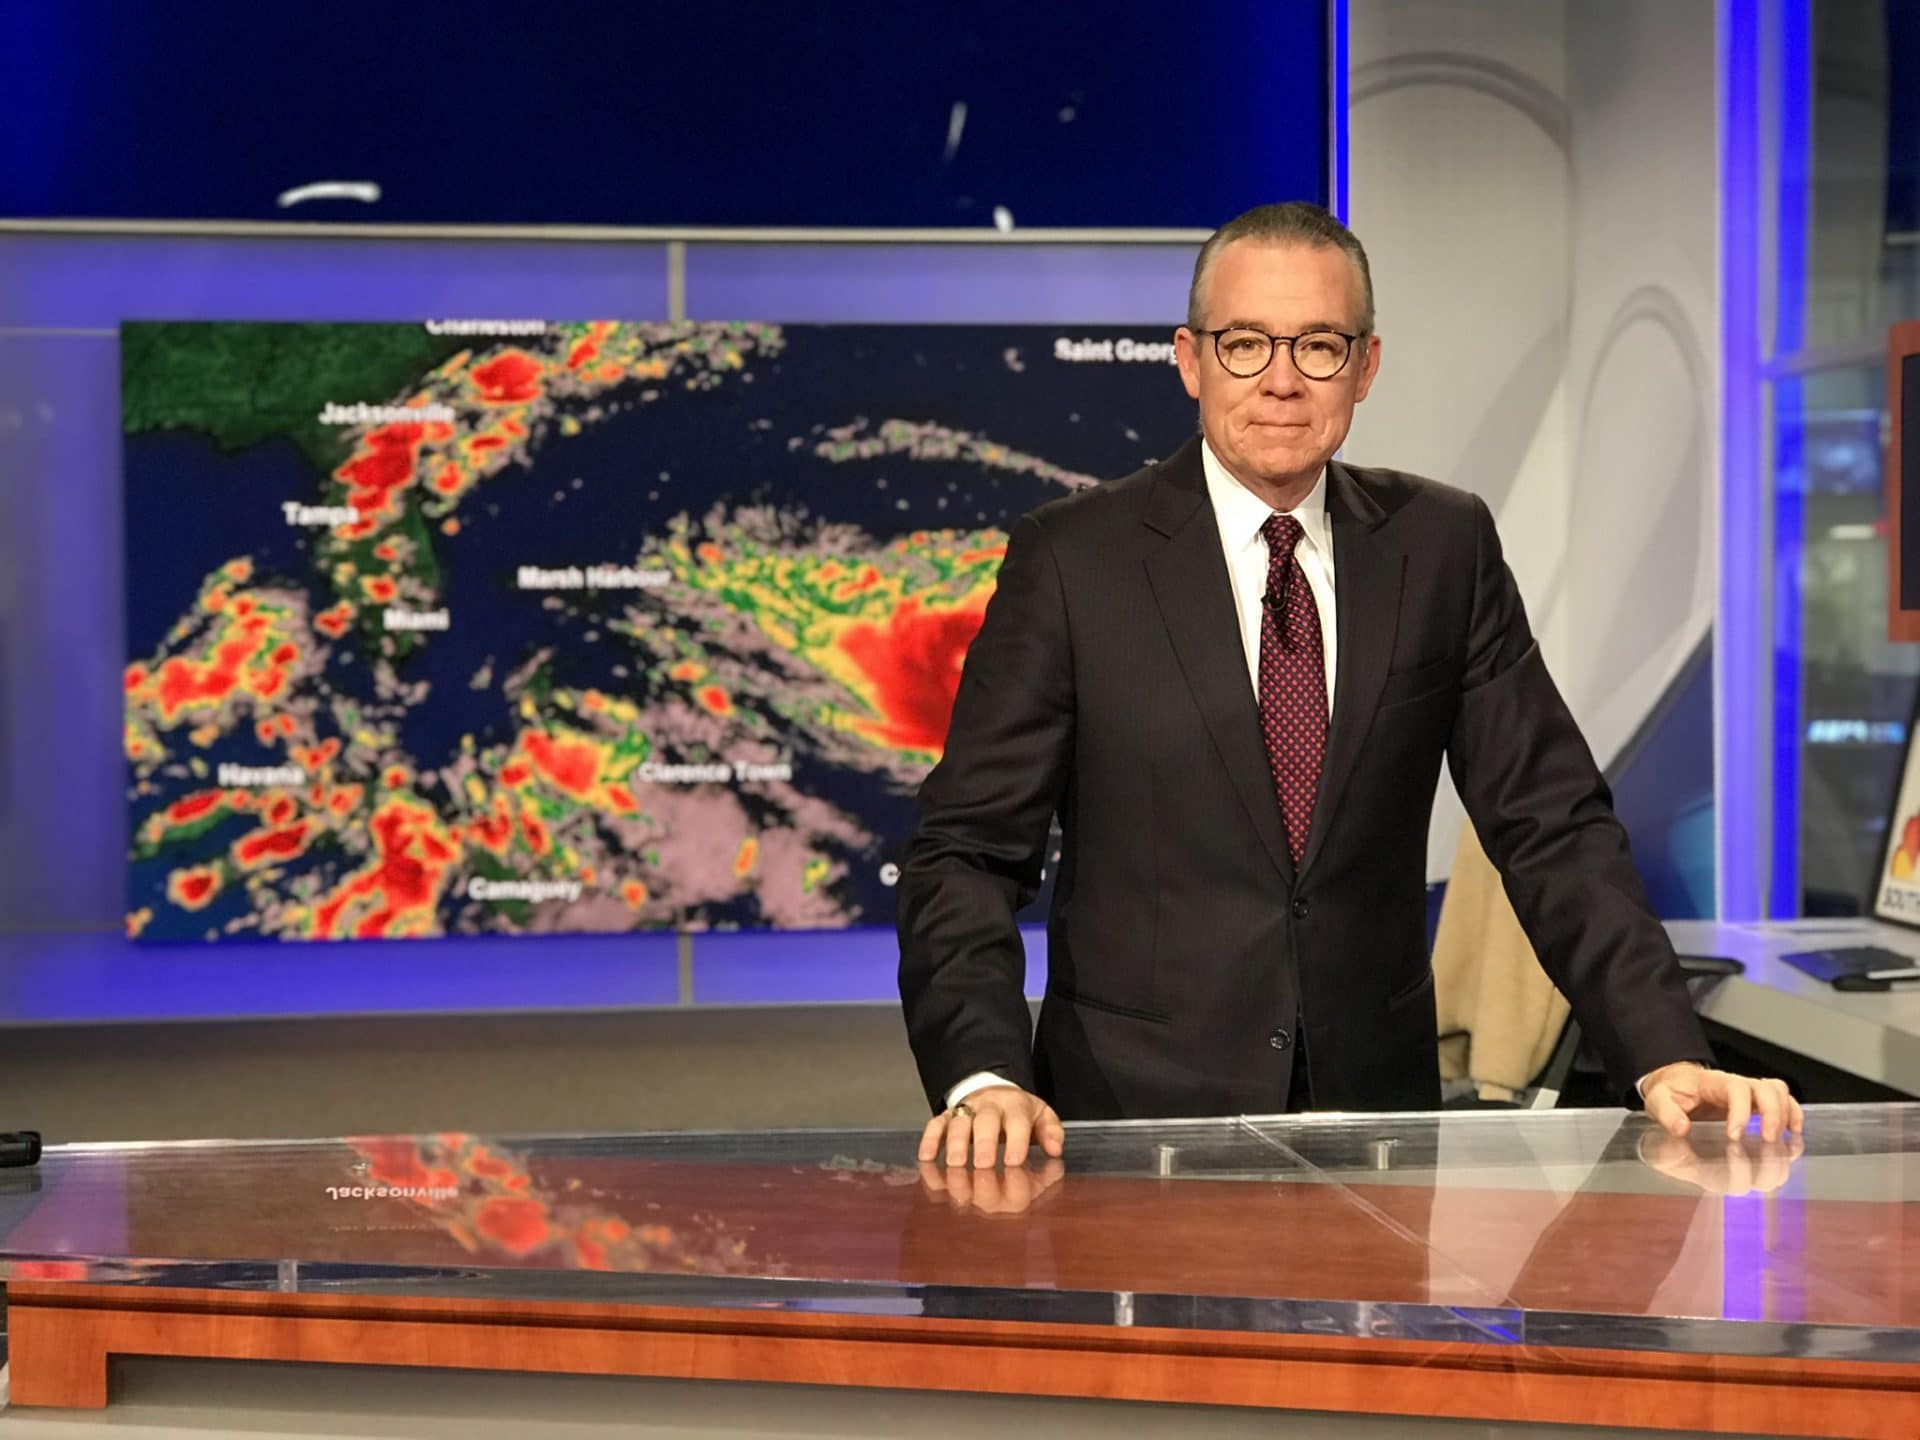 broadcast meteorologist standing in front of a map